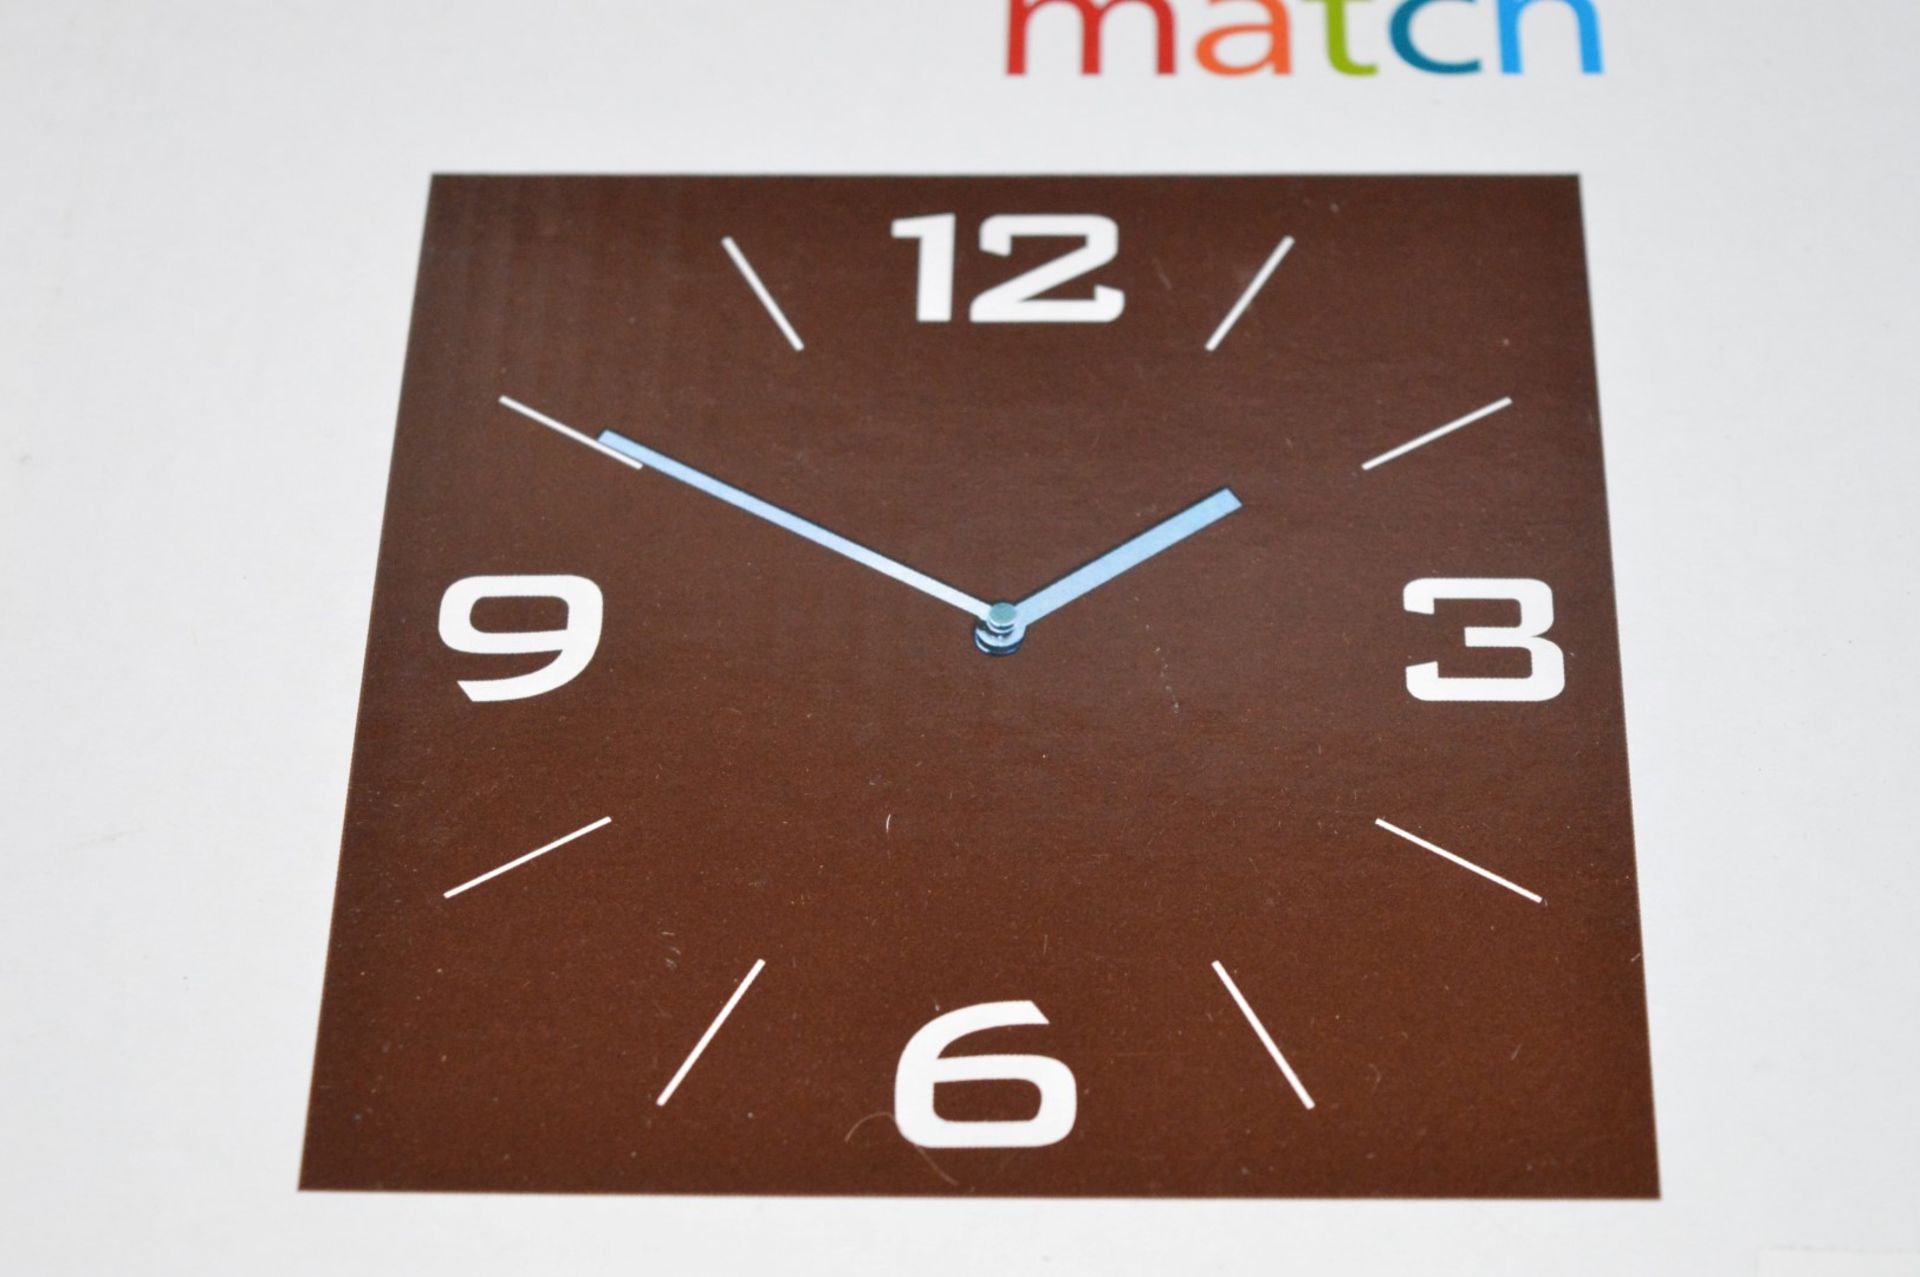 4 x Colour Match Square Wall Clocks - Chocolate Glass Case with Silver Hands and Quartz Movement - - Image 3 of 3